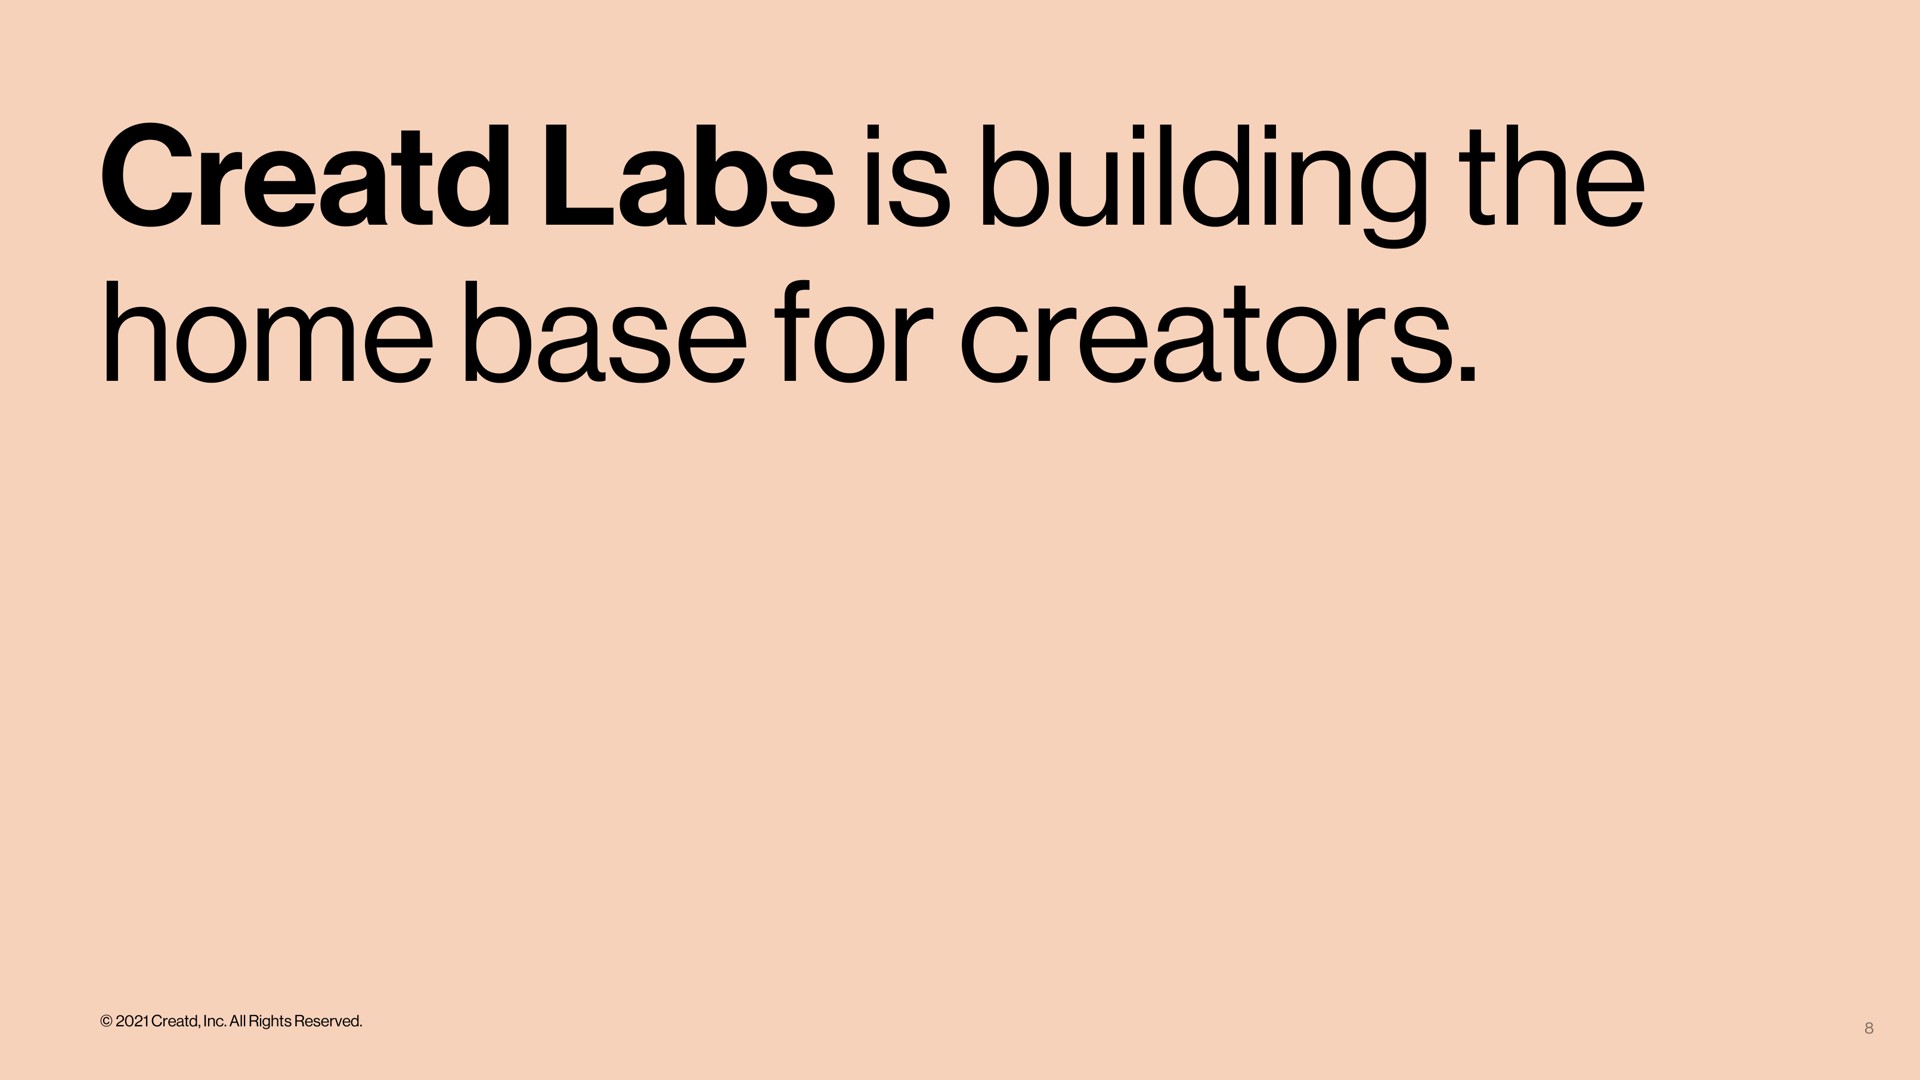 labs is building the home base for creators | Creatd